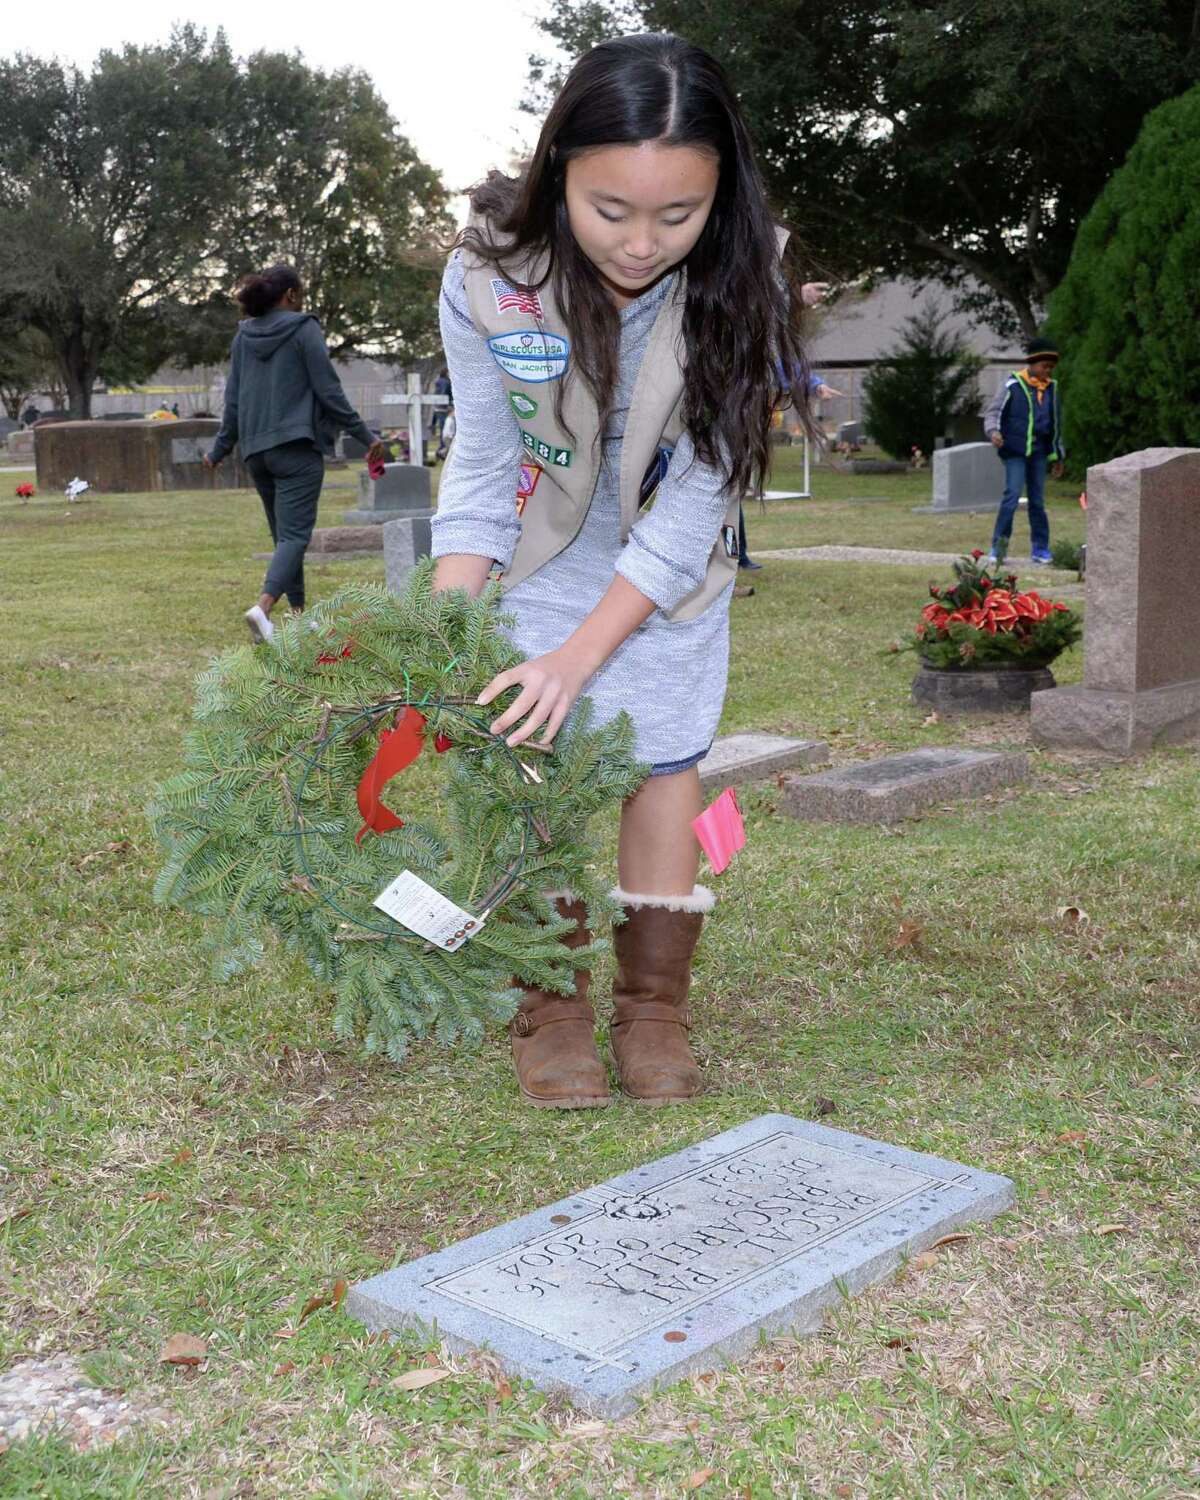 Katelyn Nitsche of Girl Scout Troop 17384 lays a wreath on a veteran's grave during the Wreaths Across America Ceremony at the Magnolia Cemetery in Katy, TX on Saturday, December 16, 2017.